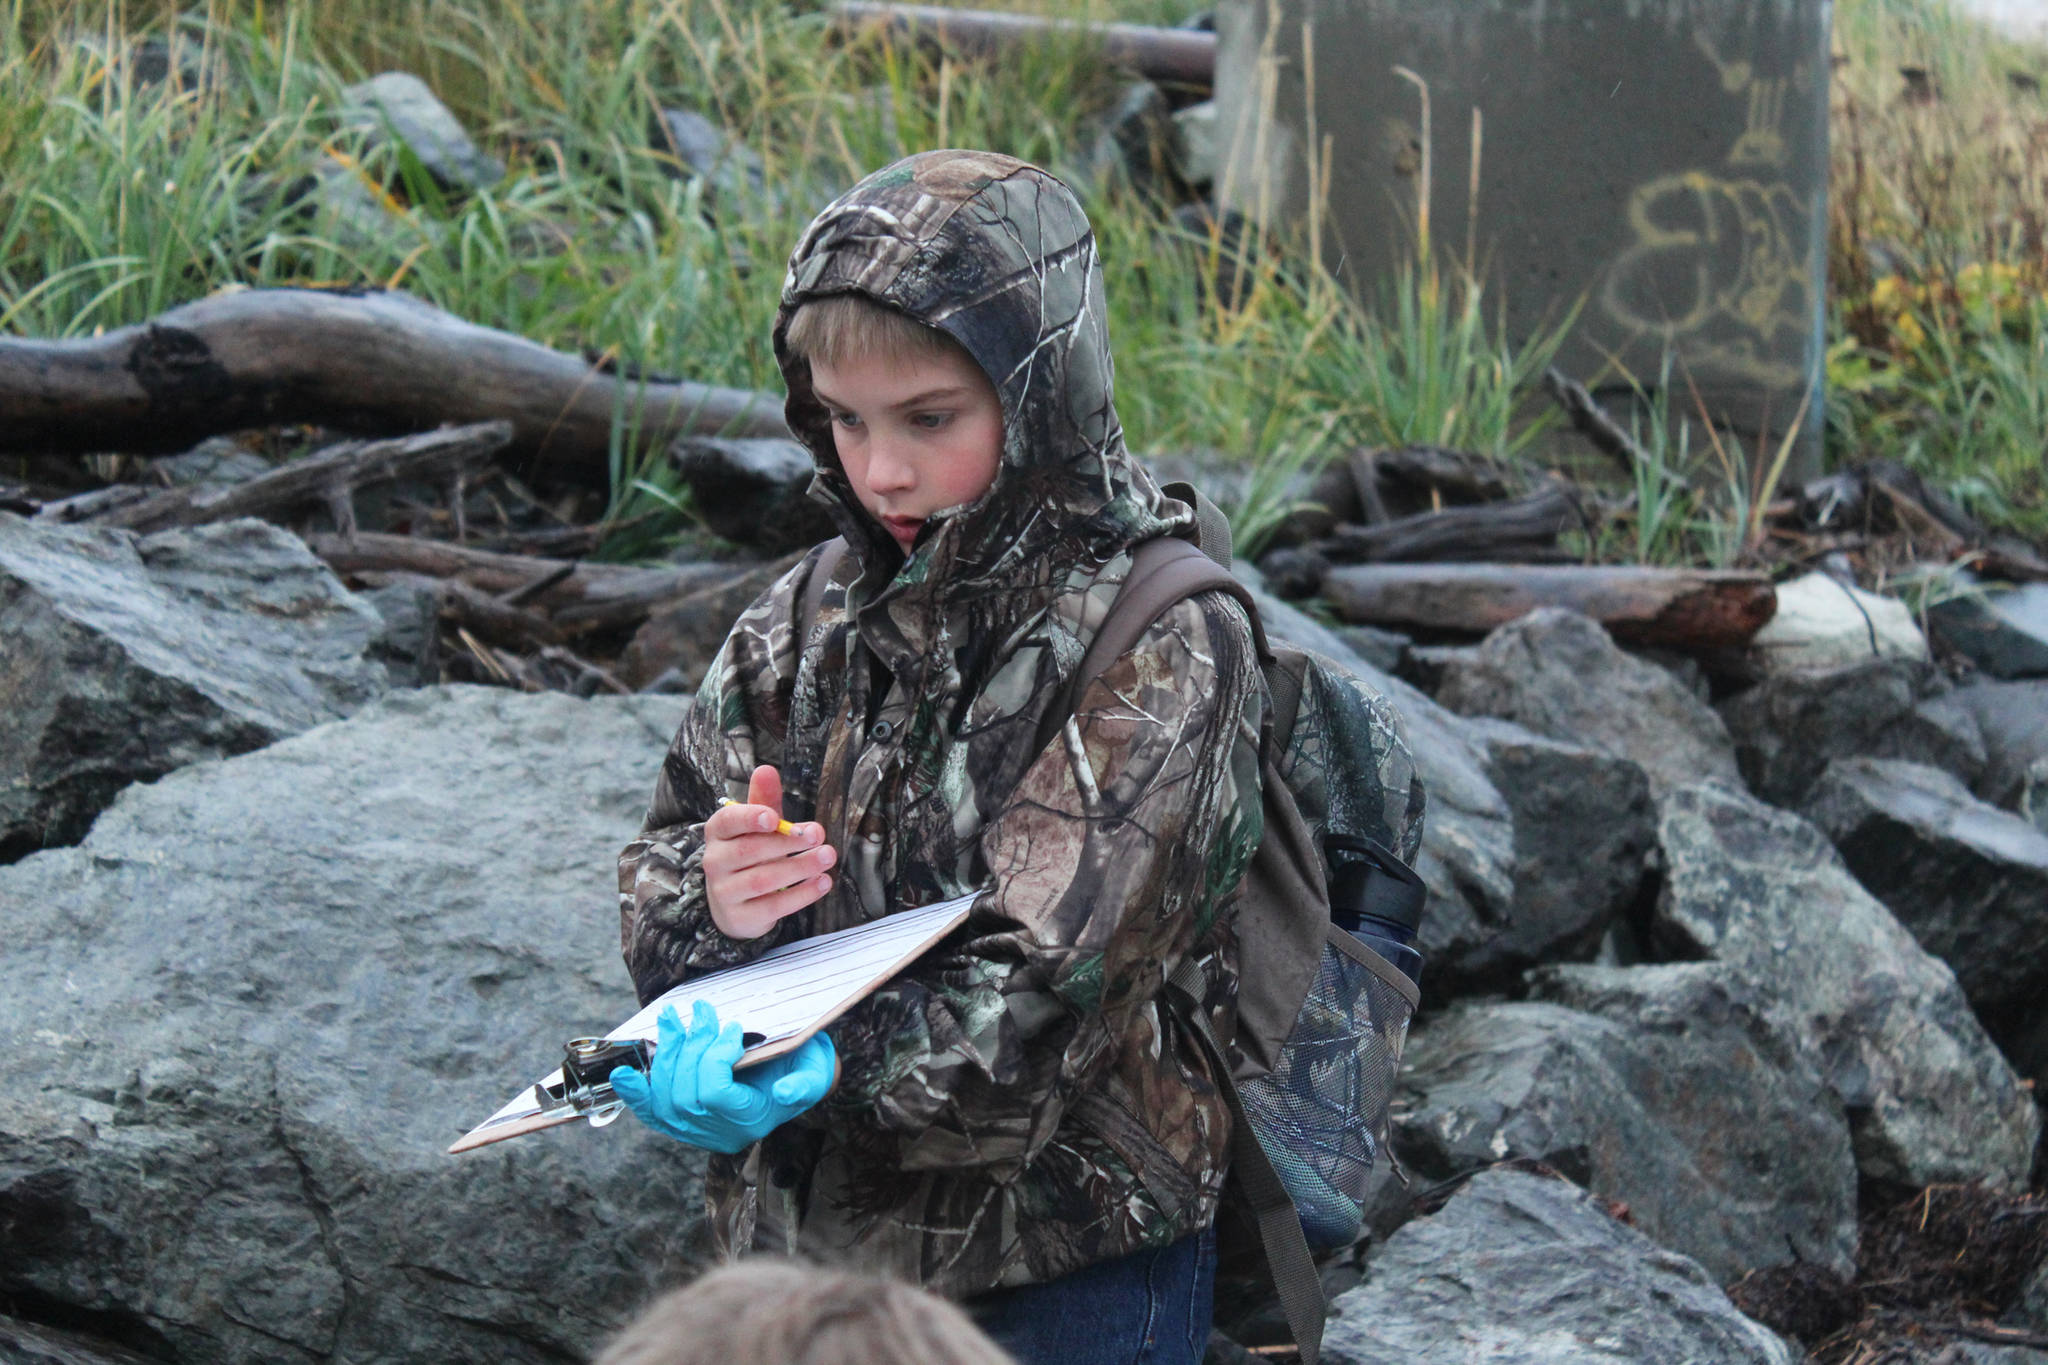 Tanner Johnson, a fourth grader at McNeil Canyon Elementary School, marks down his group’s findings on a clipboard while he and classmates clean the shoreline on Friday, Sept. 22, 2017 near Mariner Park in Homer, Alaska. Many school classes and citizen groups sign up each year to scour a section of coast during the annual Kachemak Bay CoastWalk, hosted by the Center for Alaskan Coastal Studies. (Photo by Megan Pacer/Homer News)